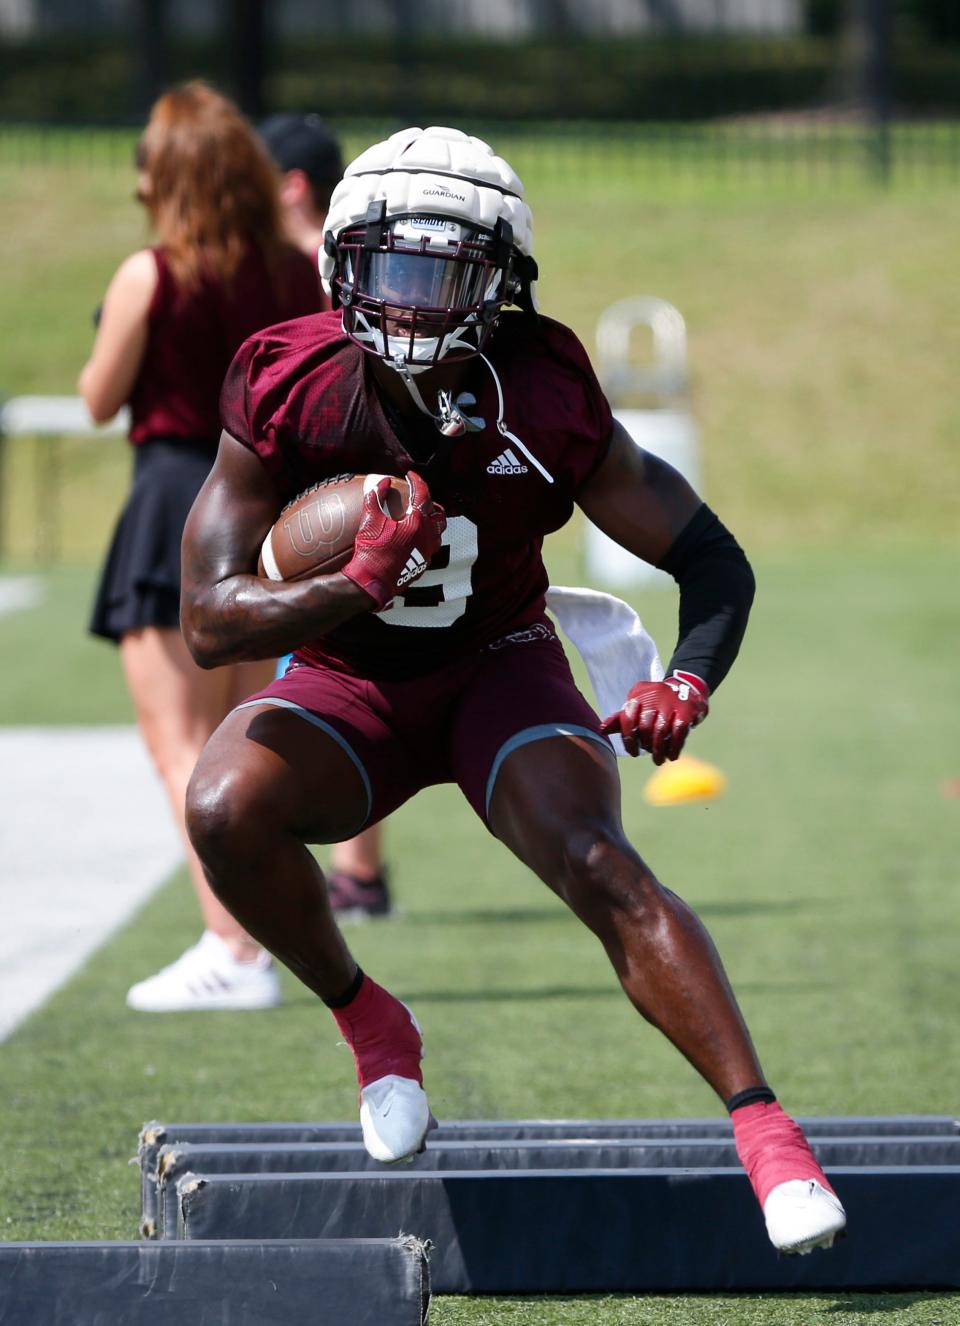 Missouri State running back Jacardia Wright during a MSU football practice on Wednesday, Aug. 3, 2022.